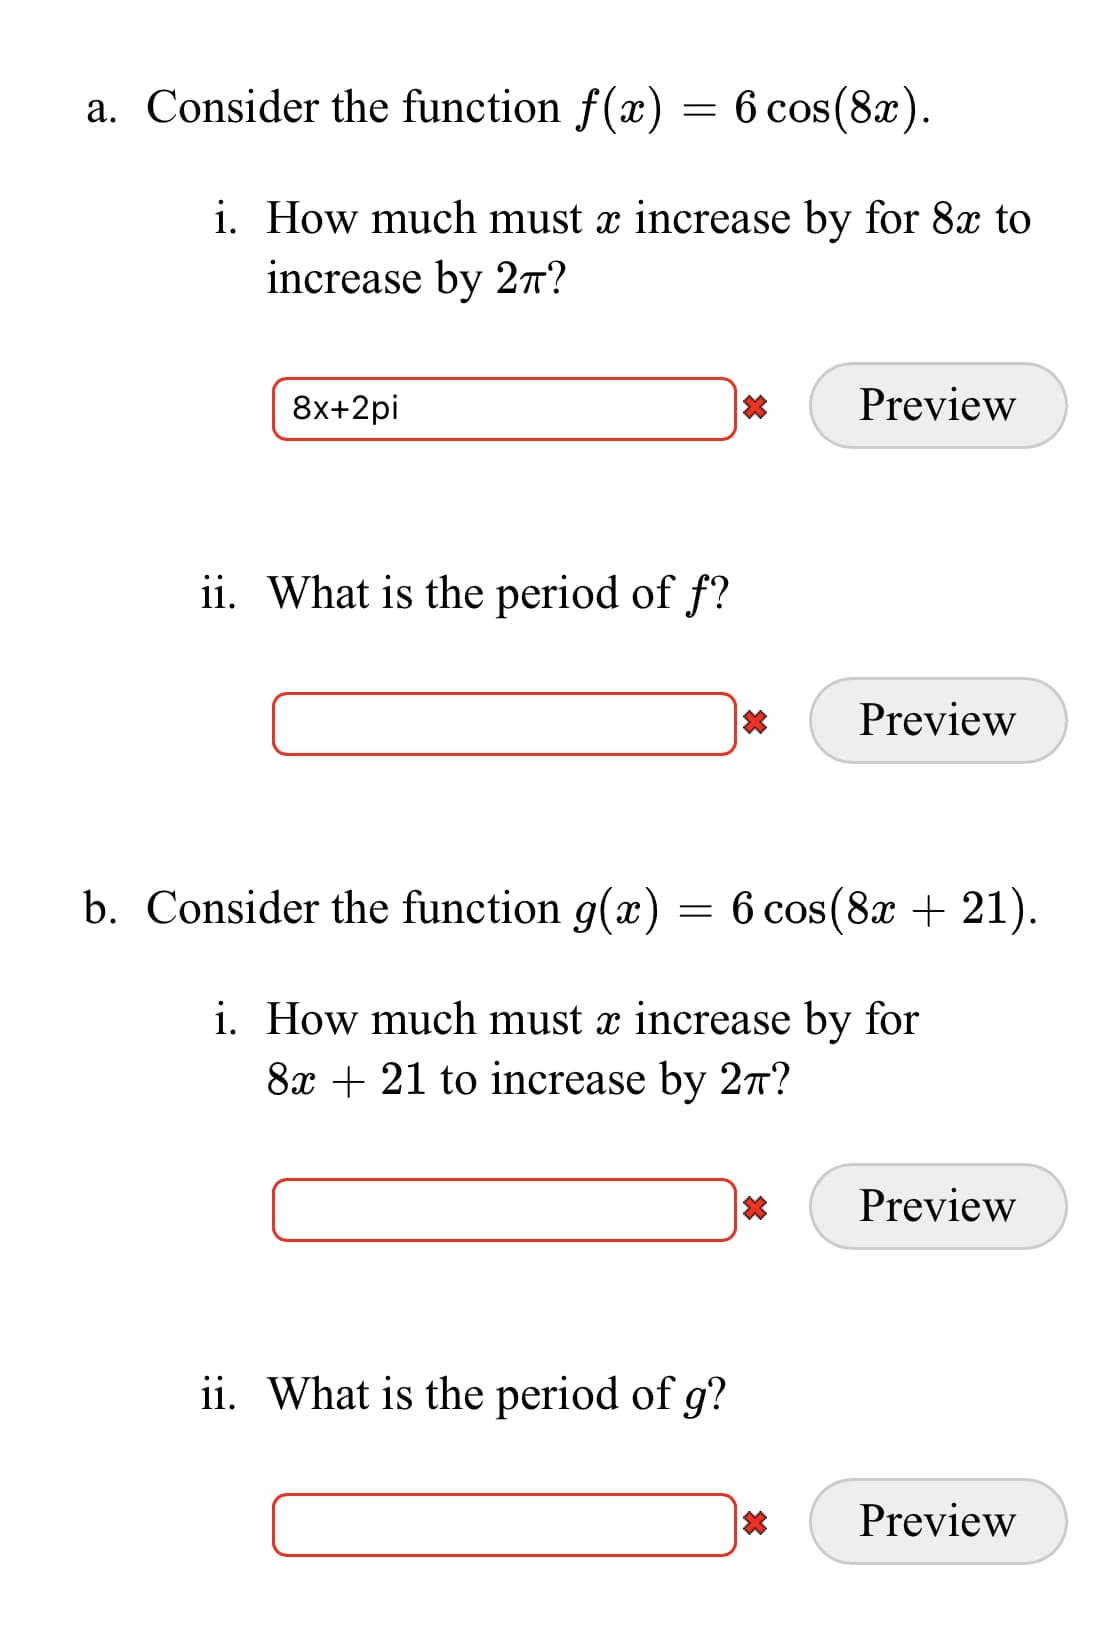 a. Consider the function f(x) = 6 cos(8x).
i. How much must x increase by for 8x to
increase by 2n?
8x+2pi
Preview
ii. What is the period of f?
Preview
b. Consider the function g(x) = 6 cos(8x + 21).
i. How much must x increase by for
8x + 21 to increase by 27?
Preview
ii. What is the period of g?
Preview
